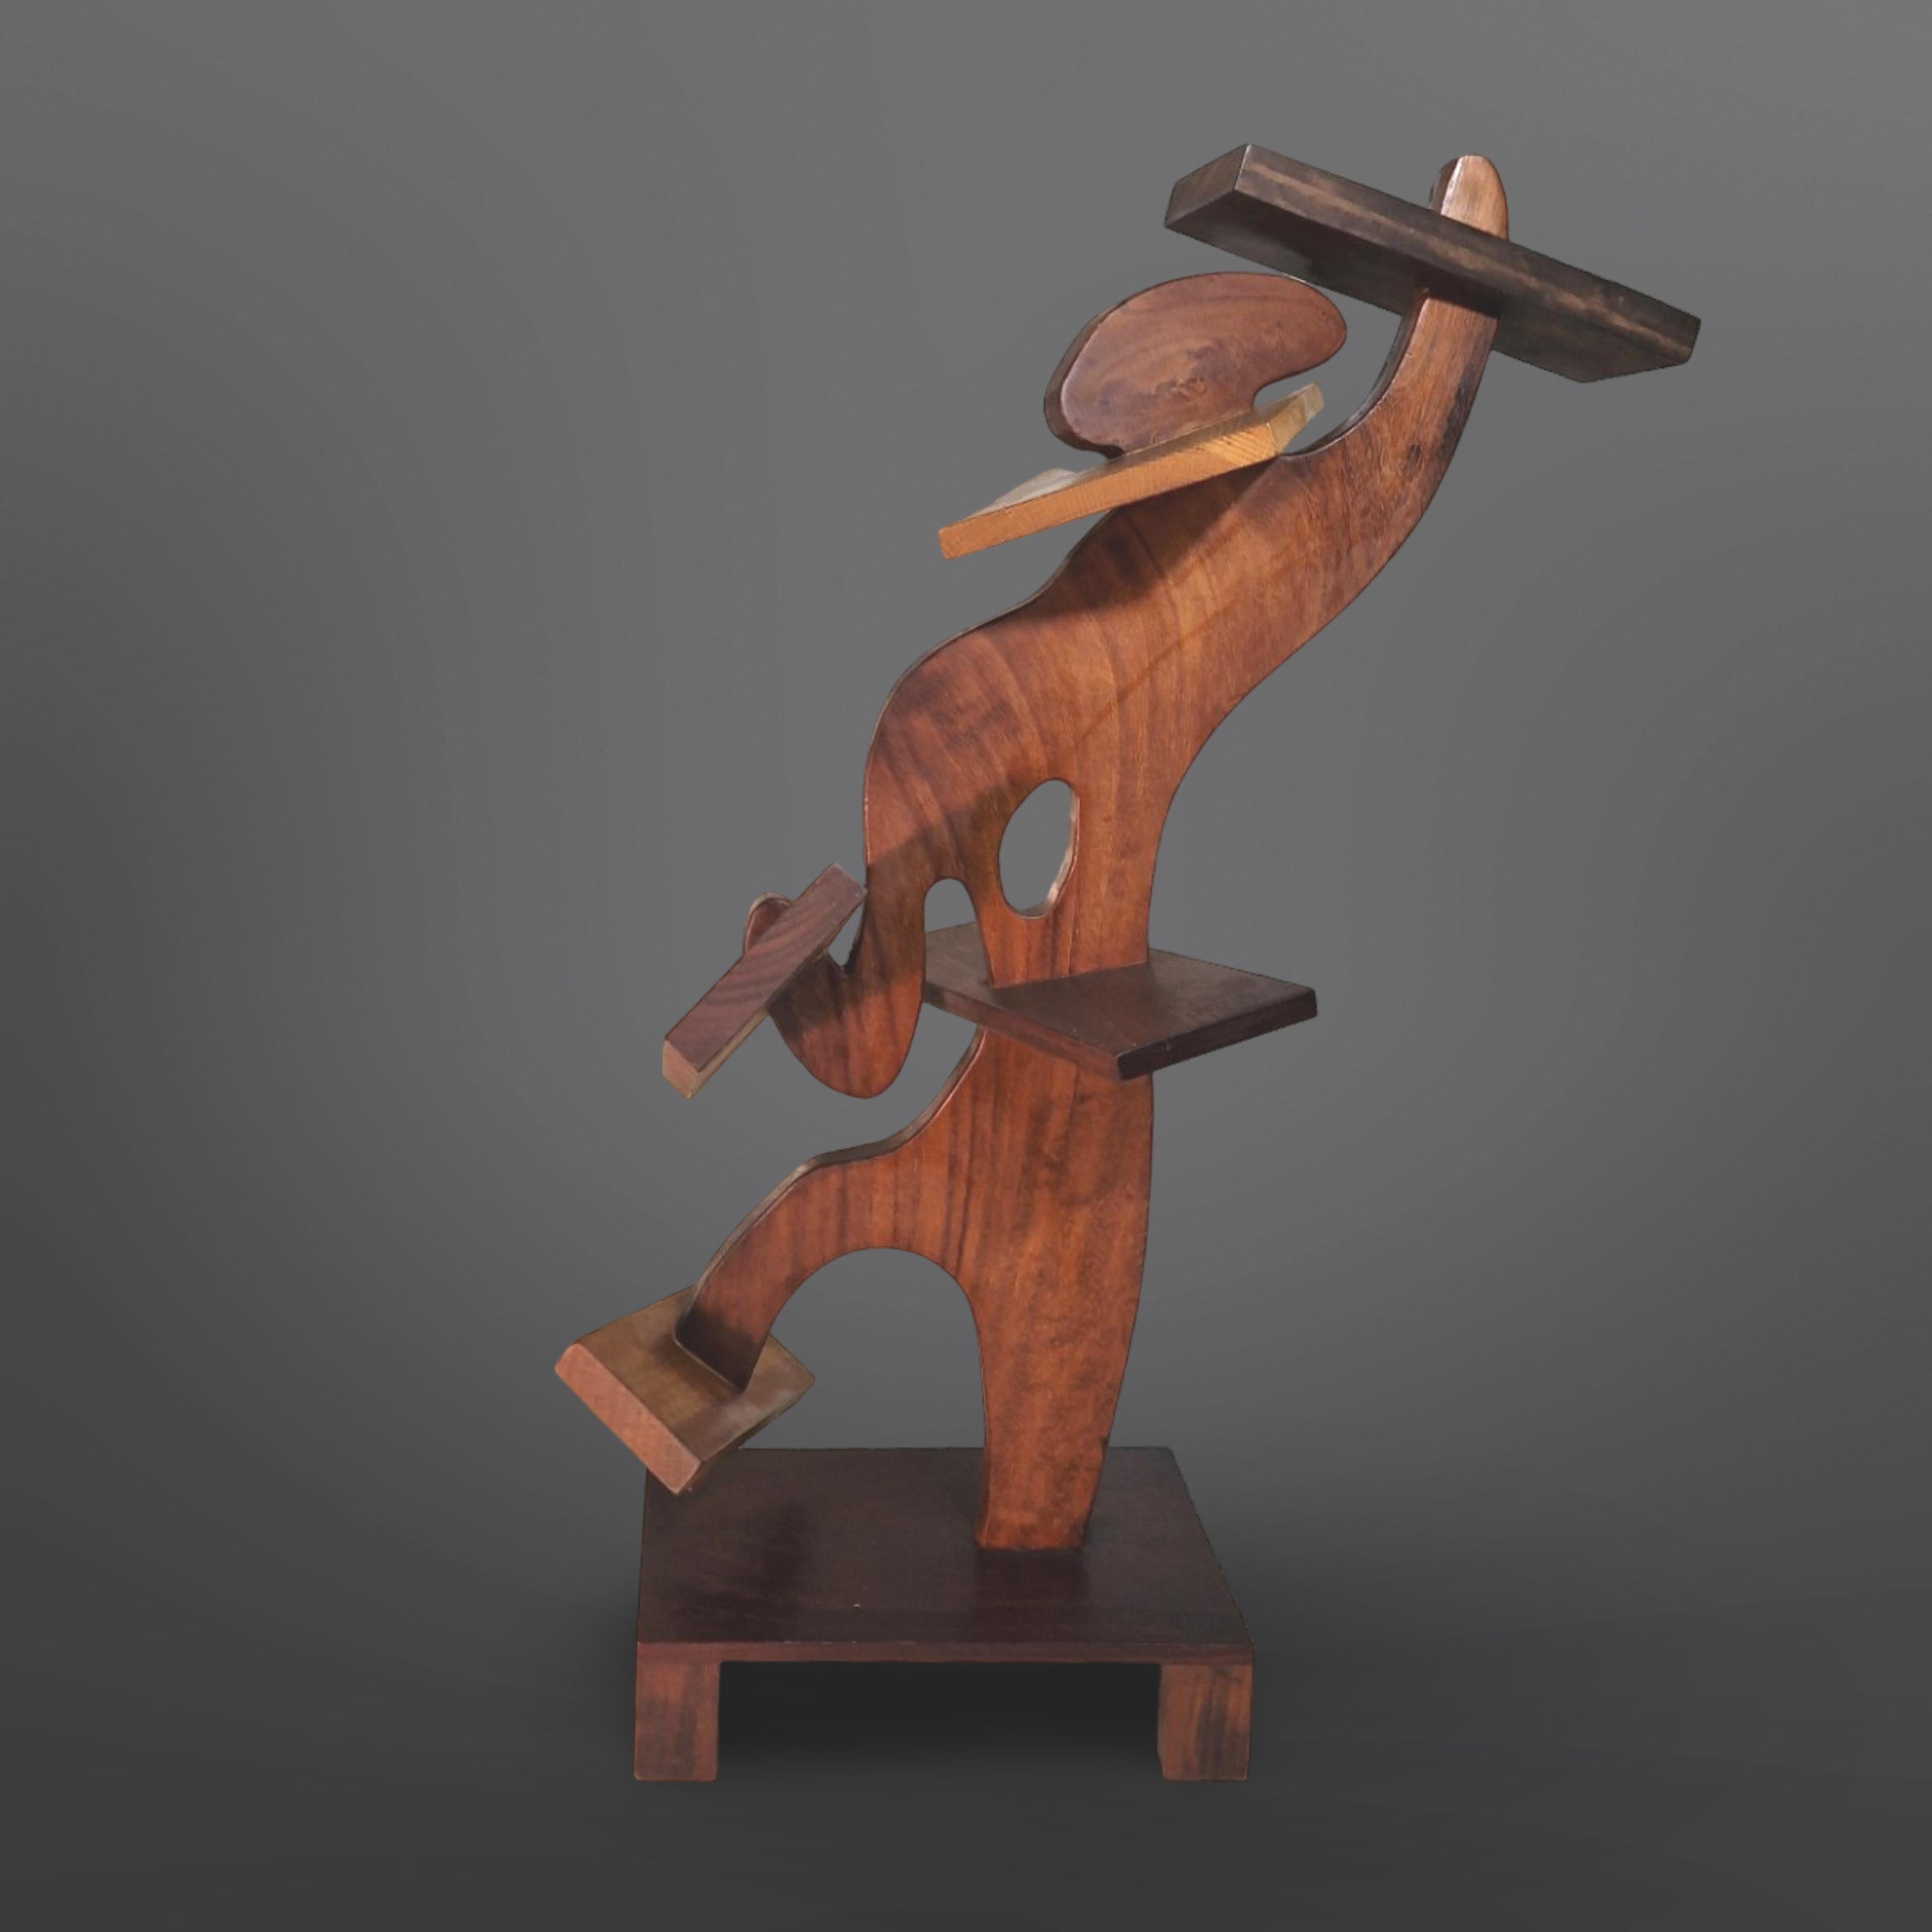 Surrealist abstract sculpture made from different kinds of wood. Created by Dutch visual artist Frederik Weerkamp. This sculpture was part of his personal collection. 
It depicts a person that is going through several wooden planks or